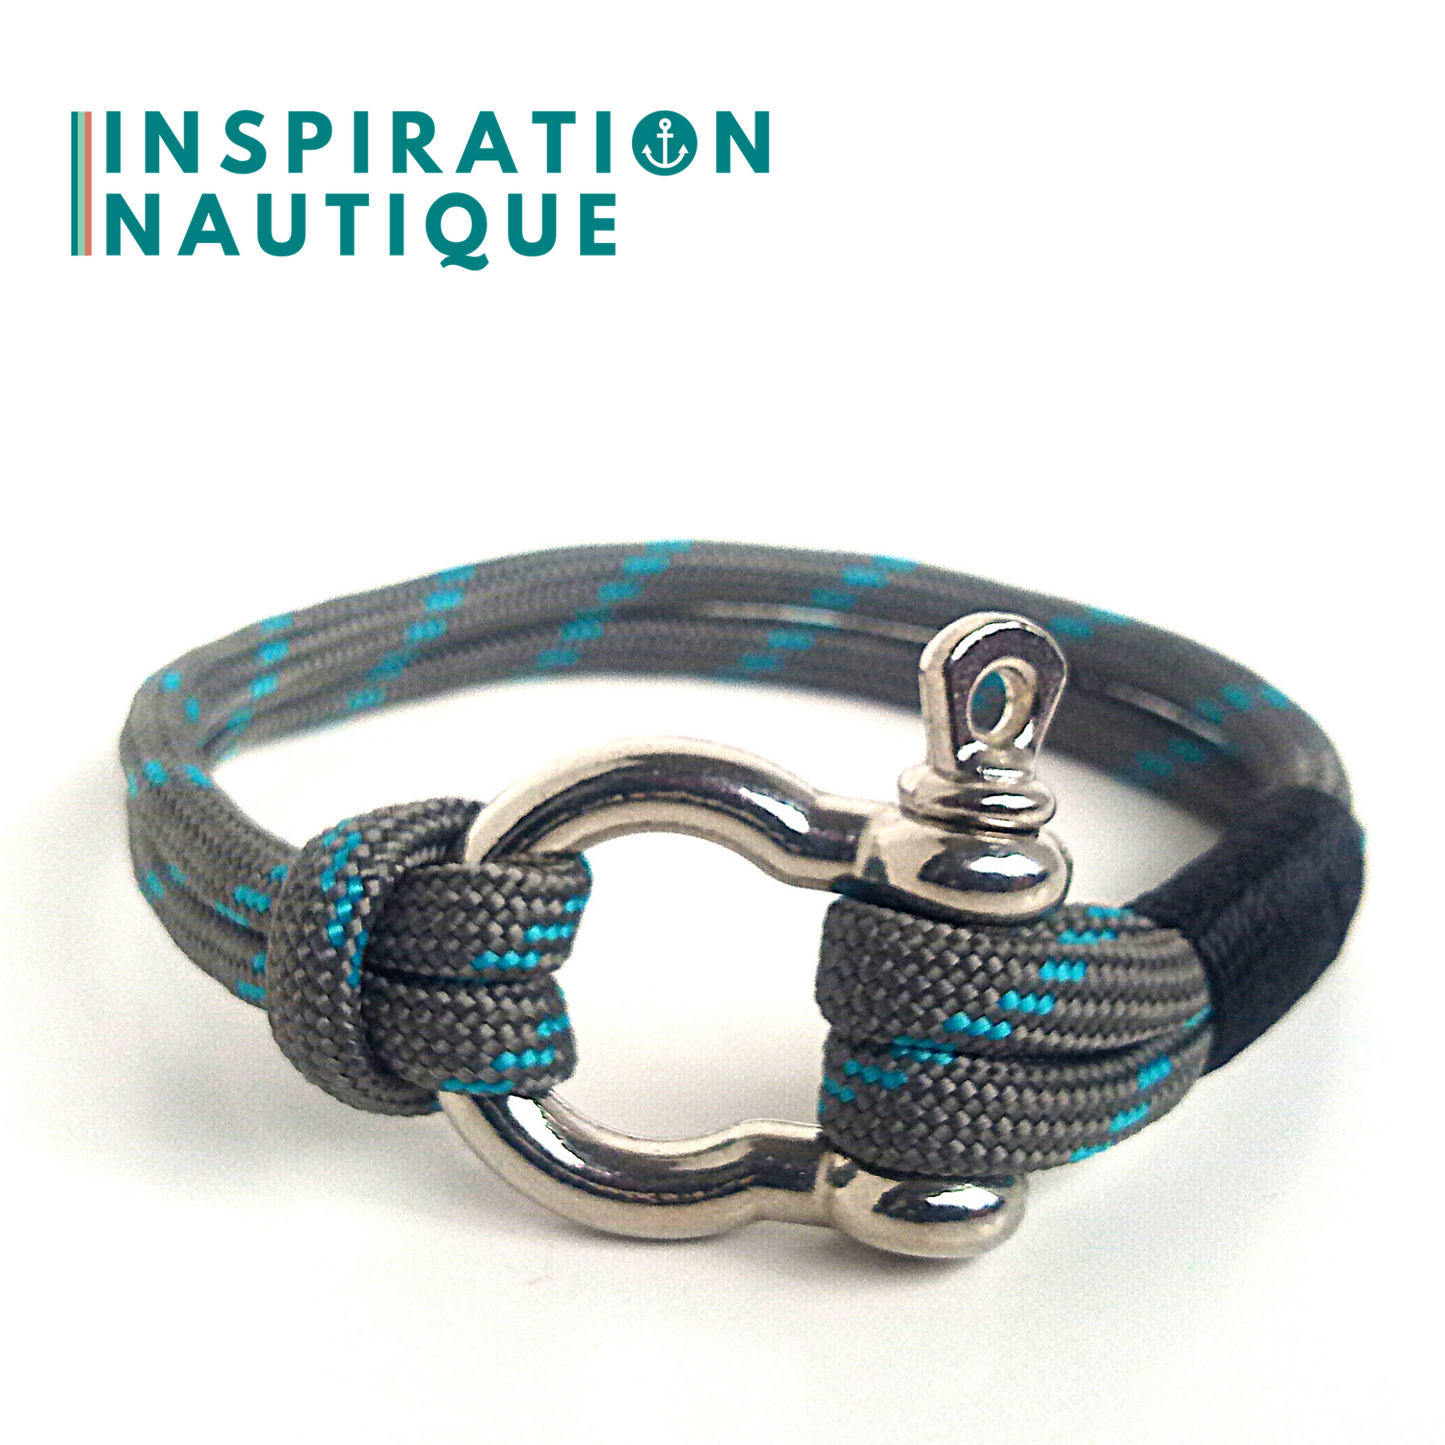 Ready to go | Marine bracelet with shackle for men or women in 550 paracord and stainless steel, Gray with turquoise tracer, Black binding, Medium-Large